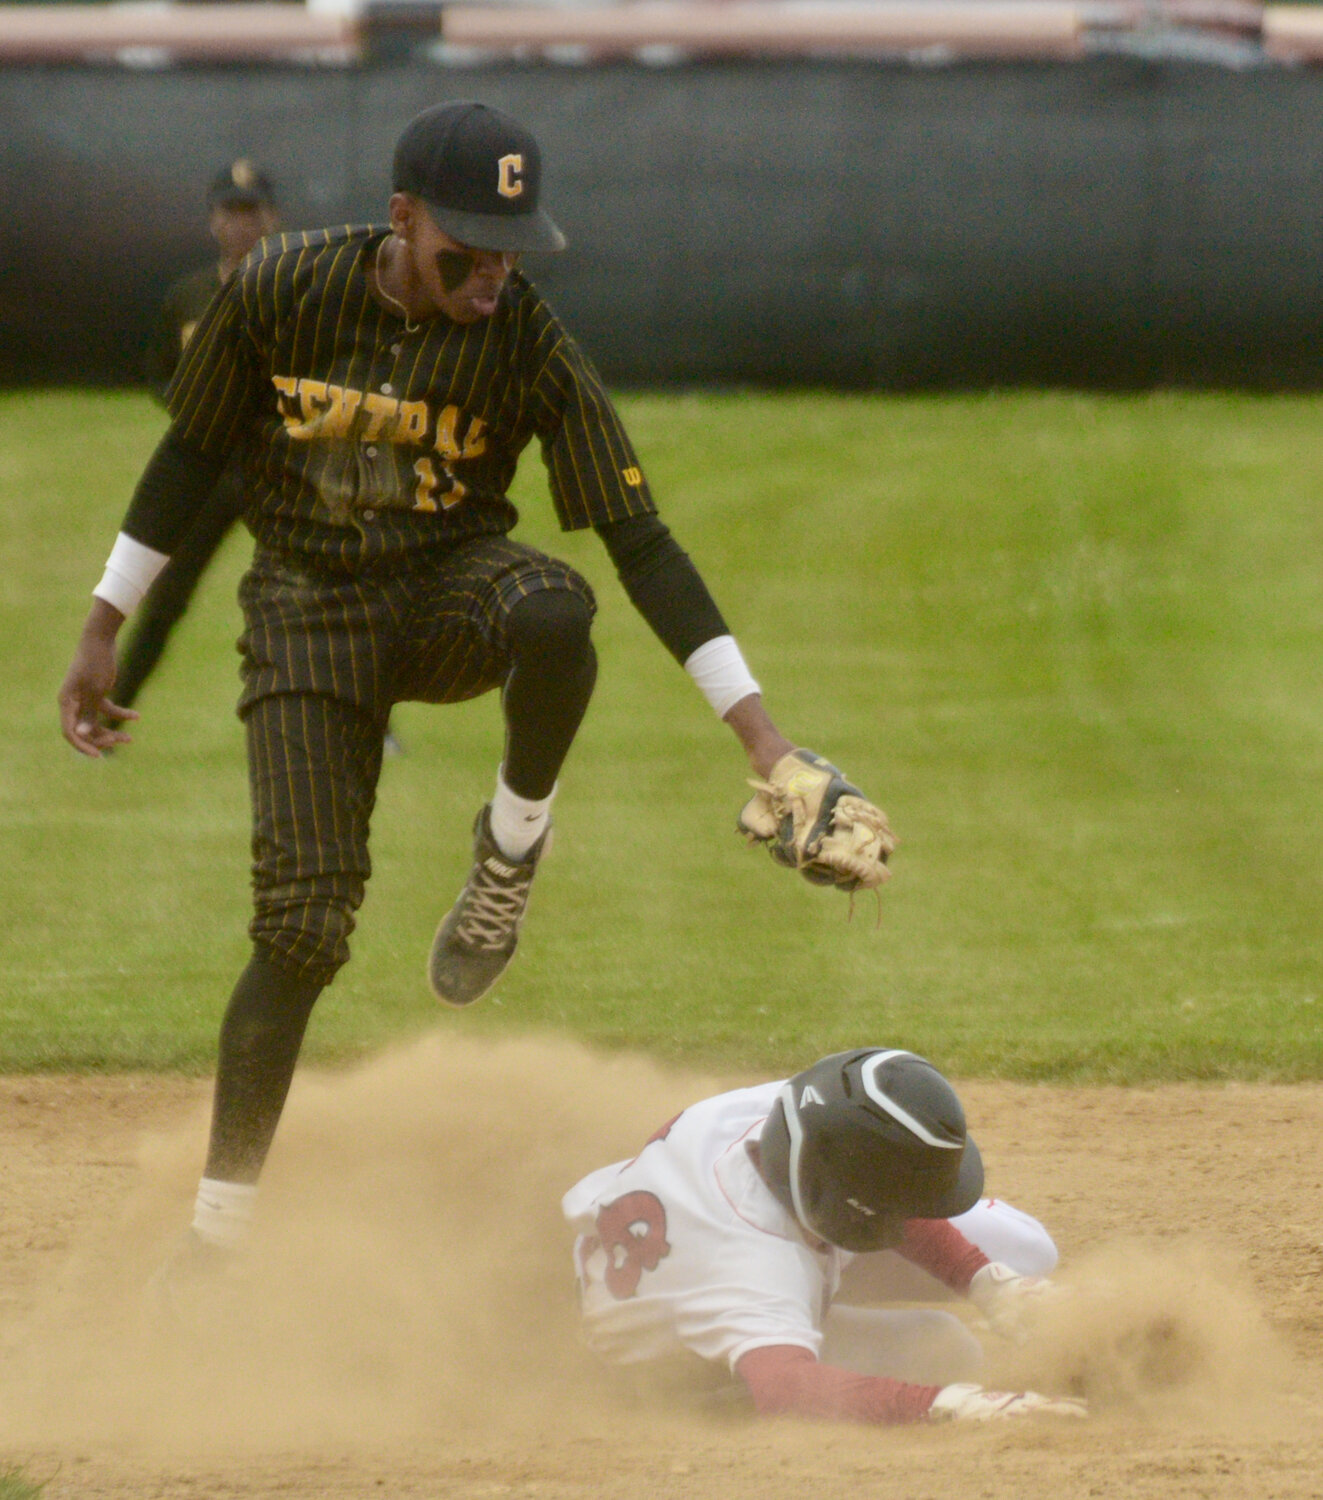 Patriots sophomore Charles Cord slides safely into second under a Central player’s tag late in Monday’s game.